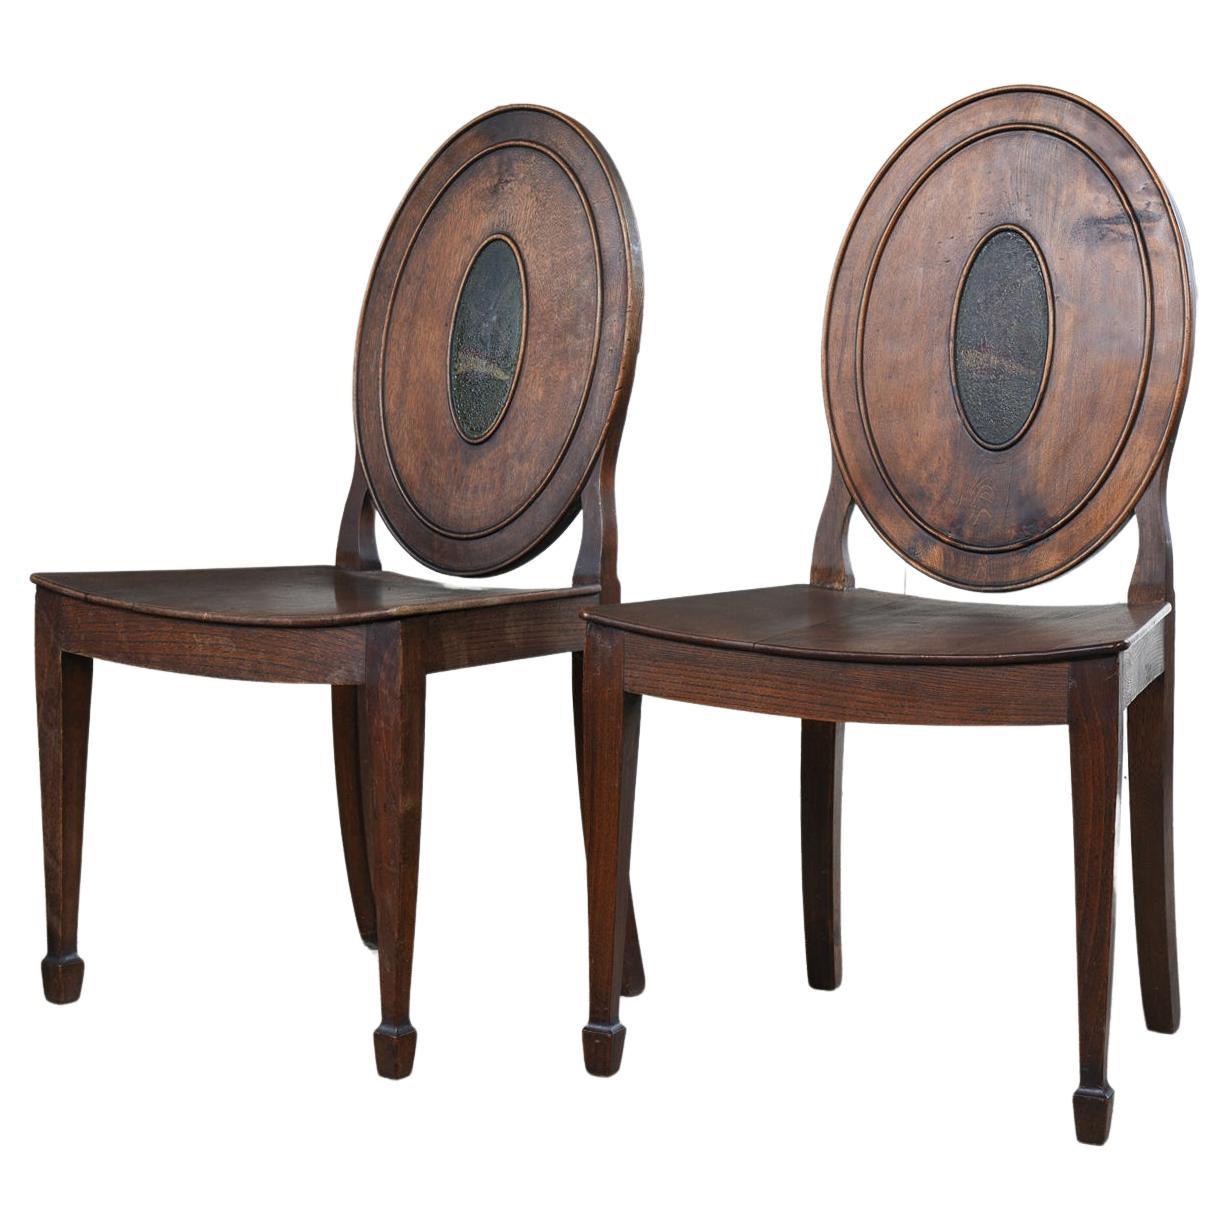 A Pair of George III Side Chairs in the manner of Mayhew & Ince For Sale